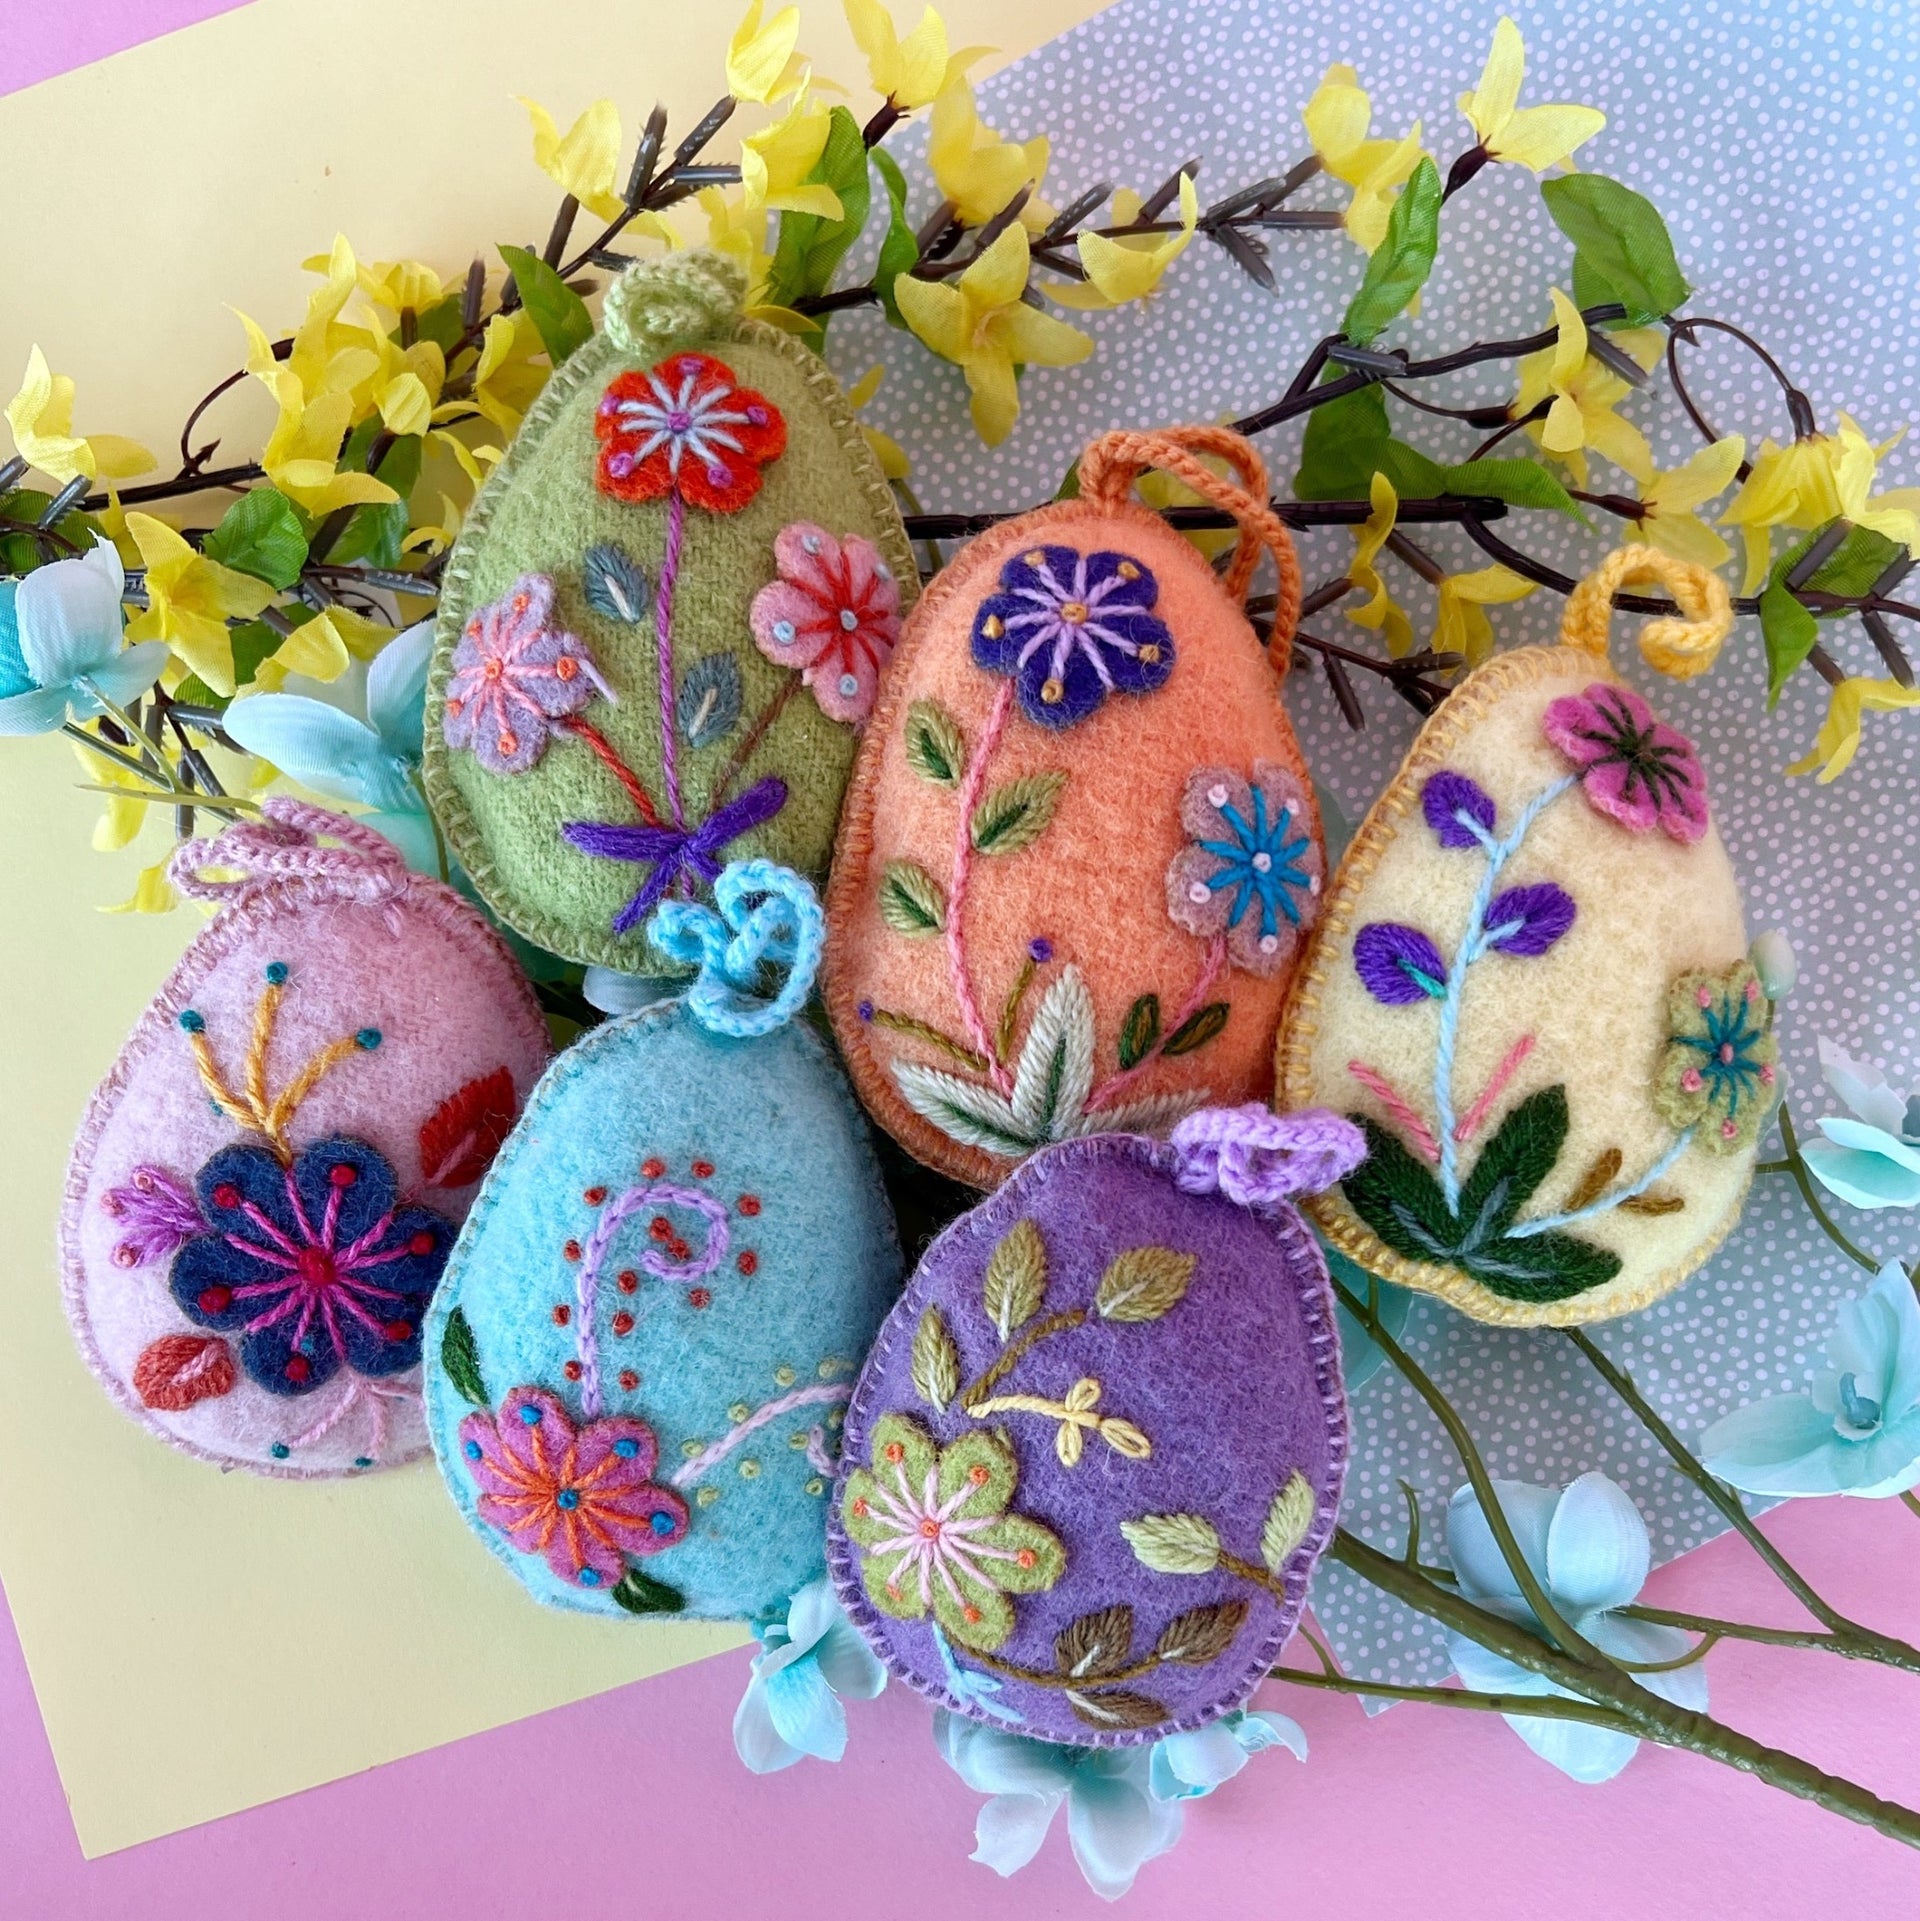 Six embroidered wool Easter Egg Ornaments in pastel colors styled for spring